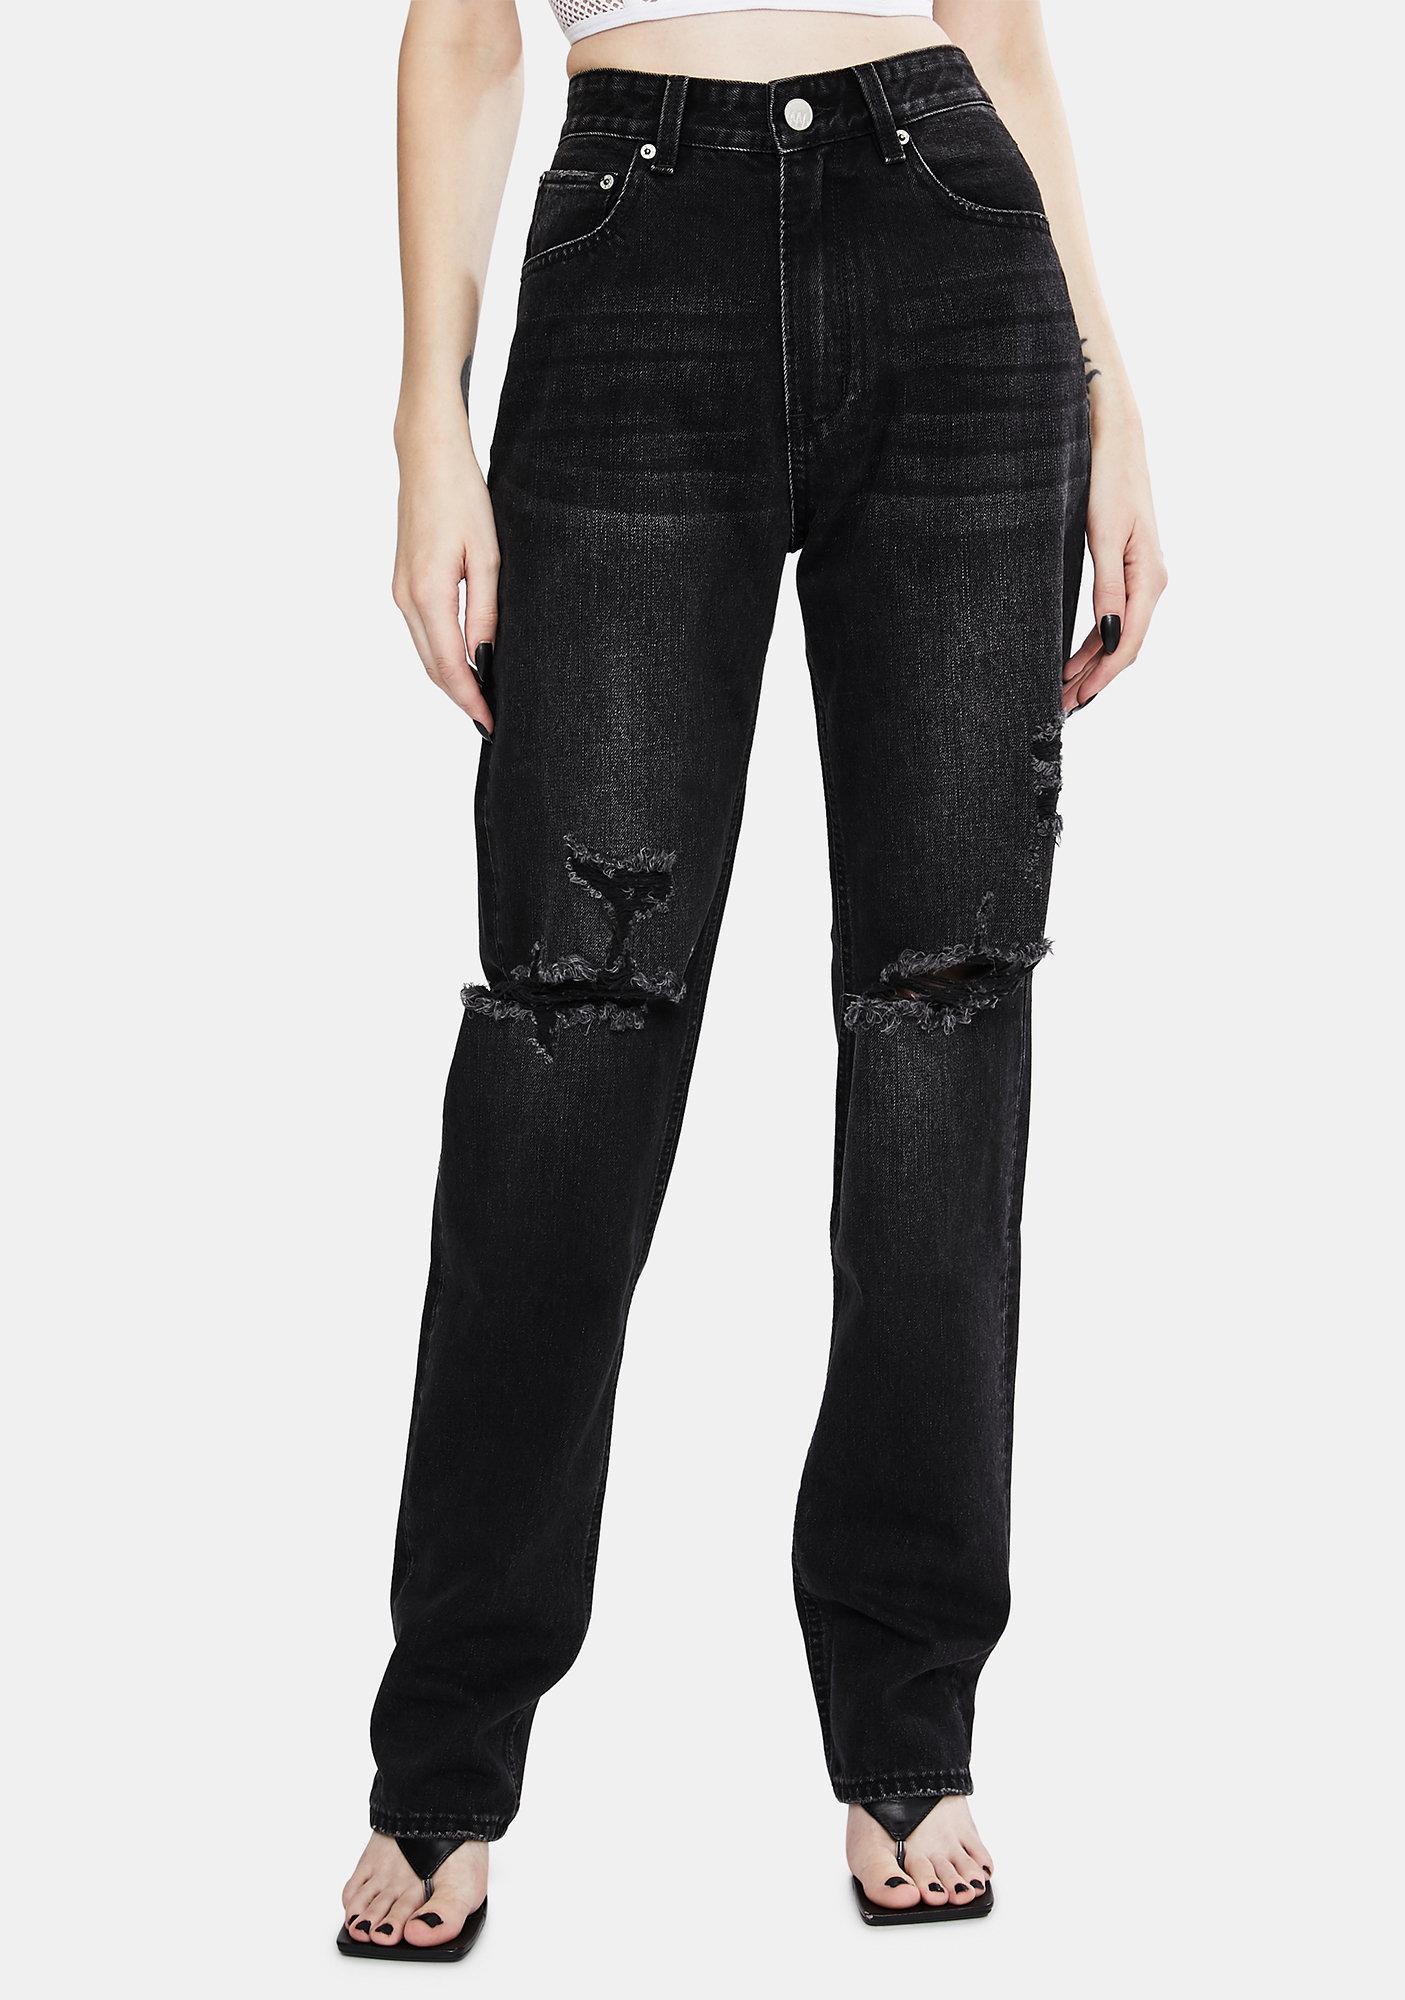 ZGY Ashes To Ashes Rebound Mid Rise Jeans | Dolls Kill